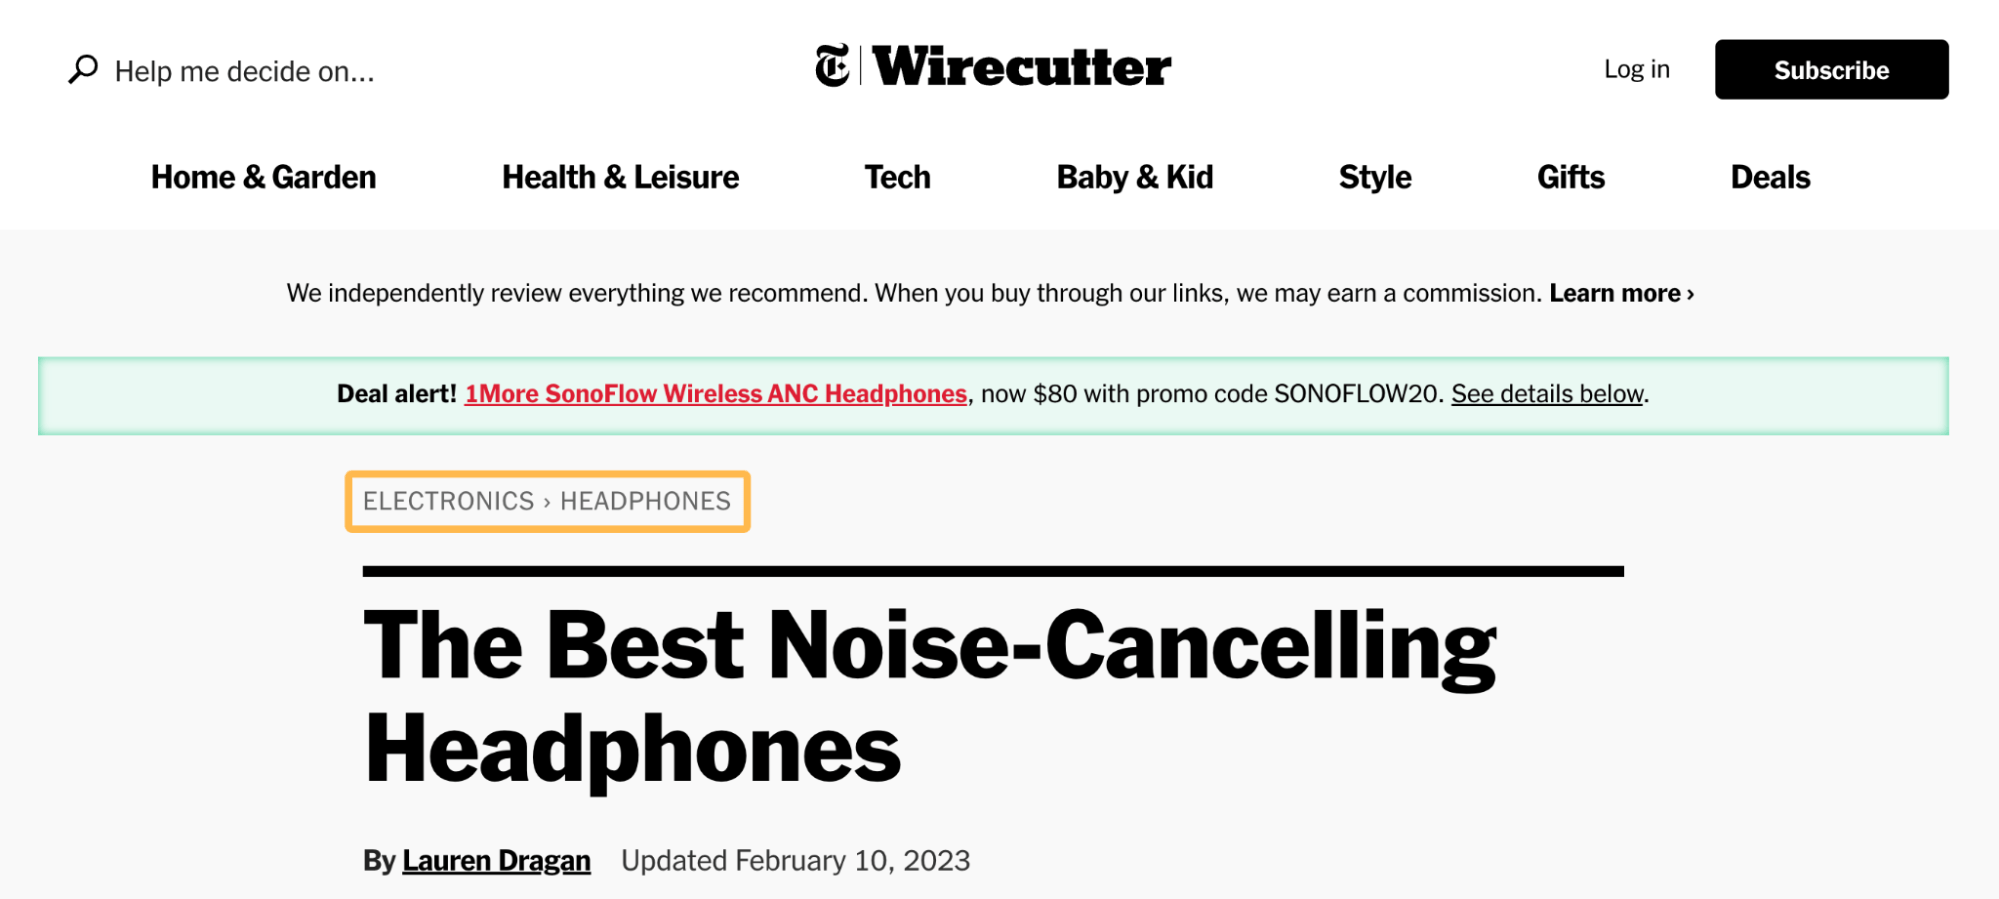 Wirecutter's category and navigation